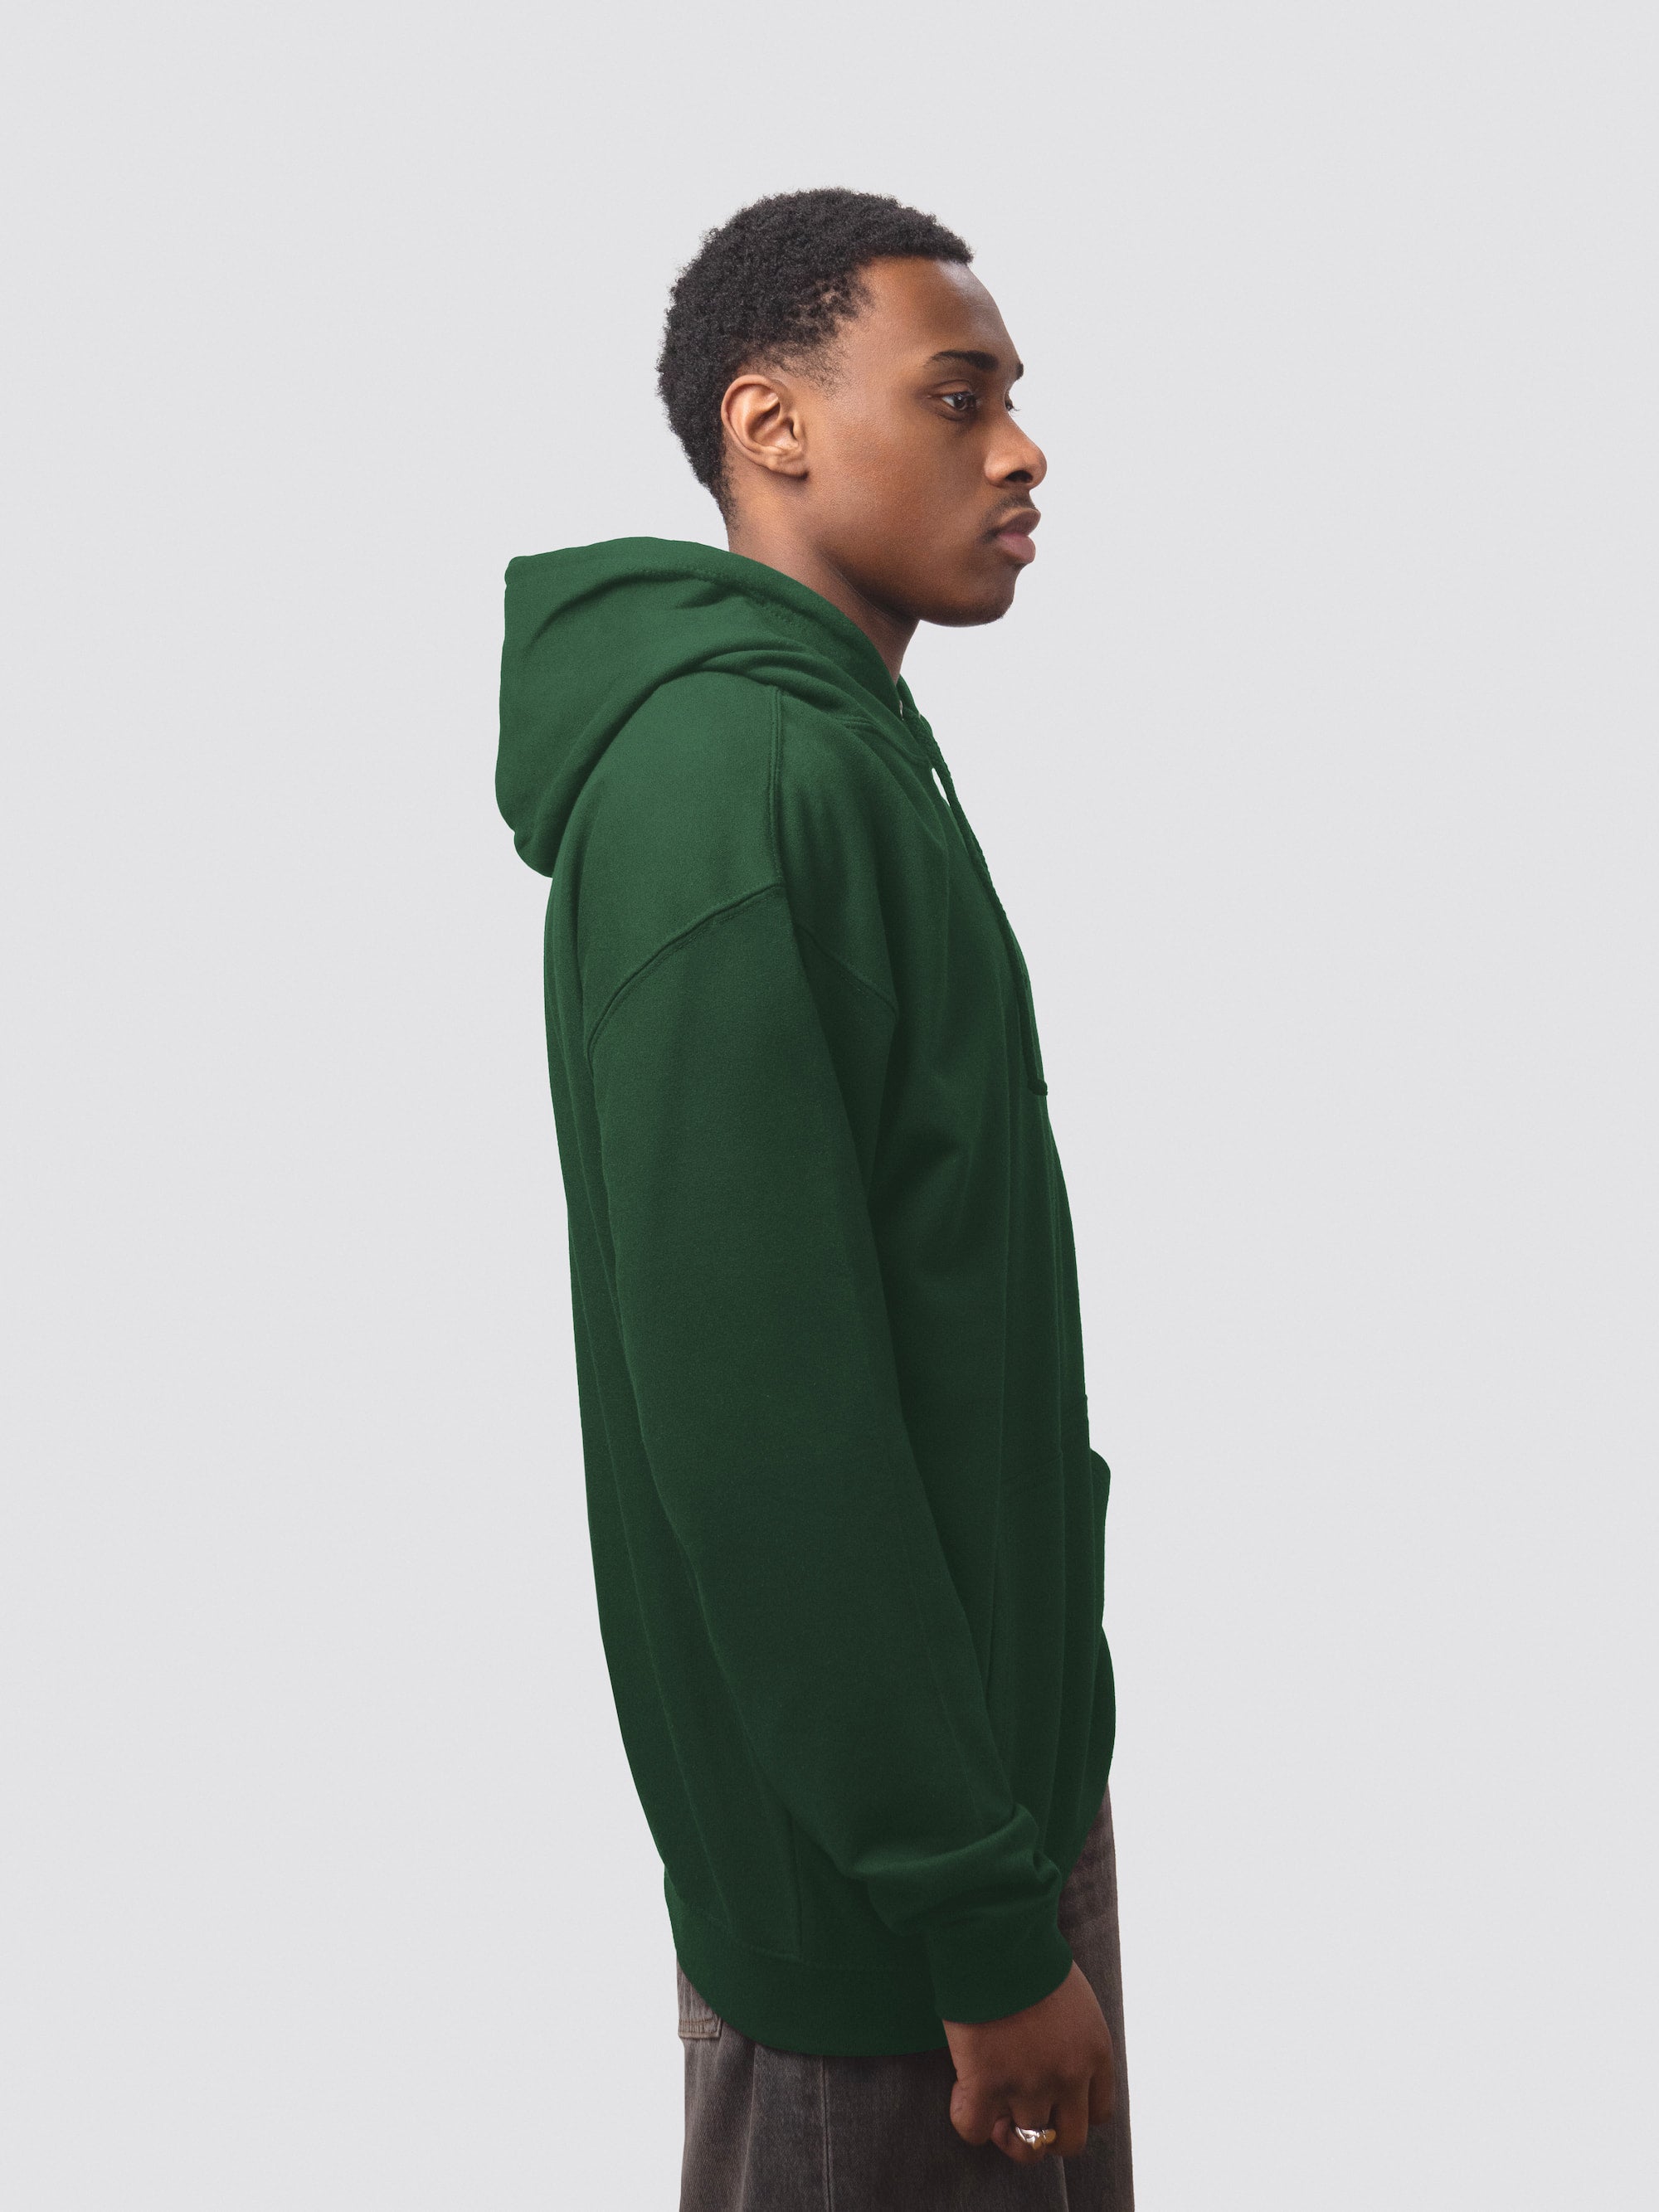 The side of a bottle green hoodie, worn by a male student mode